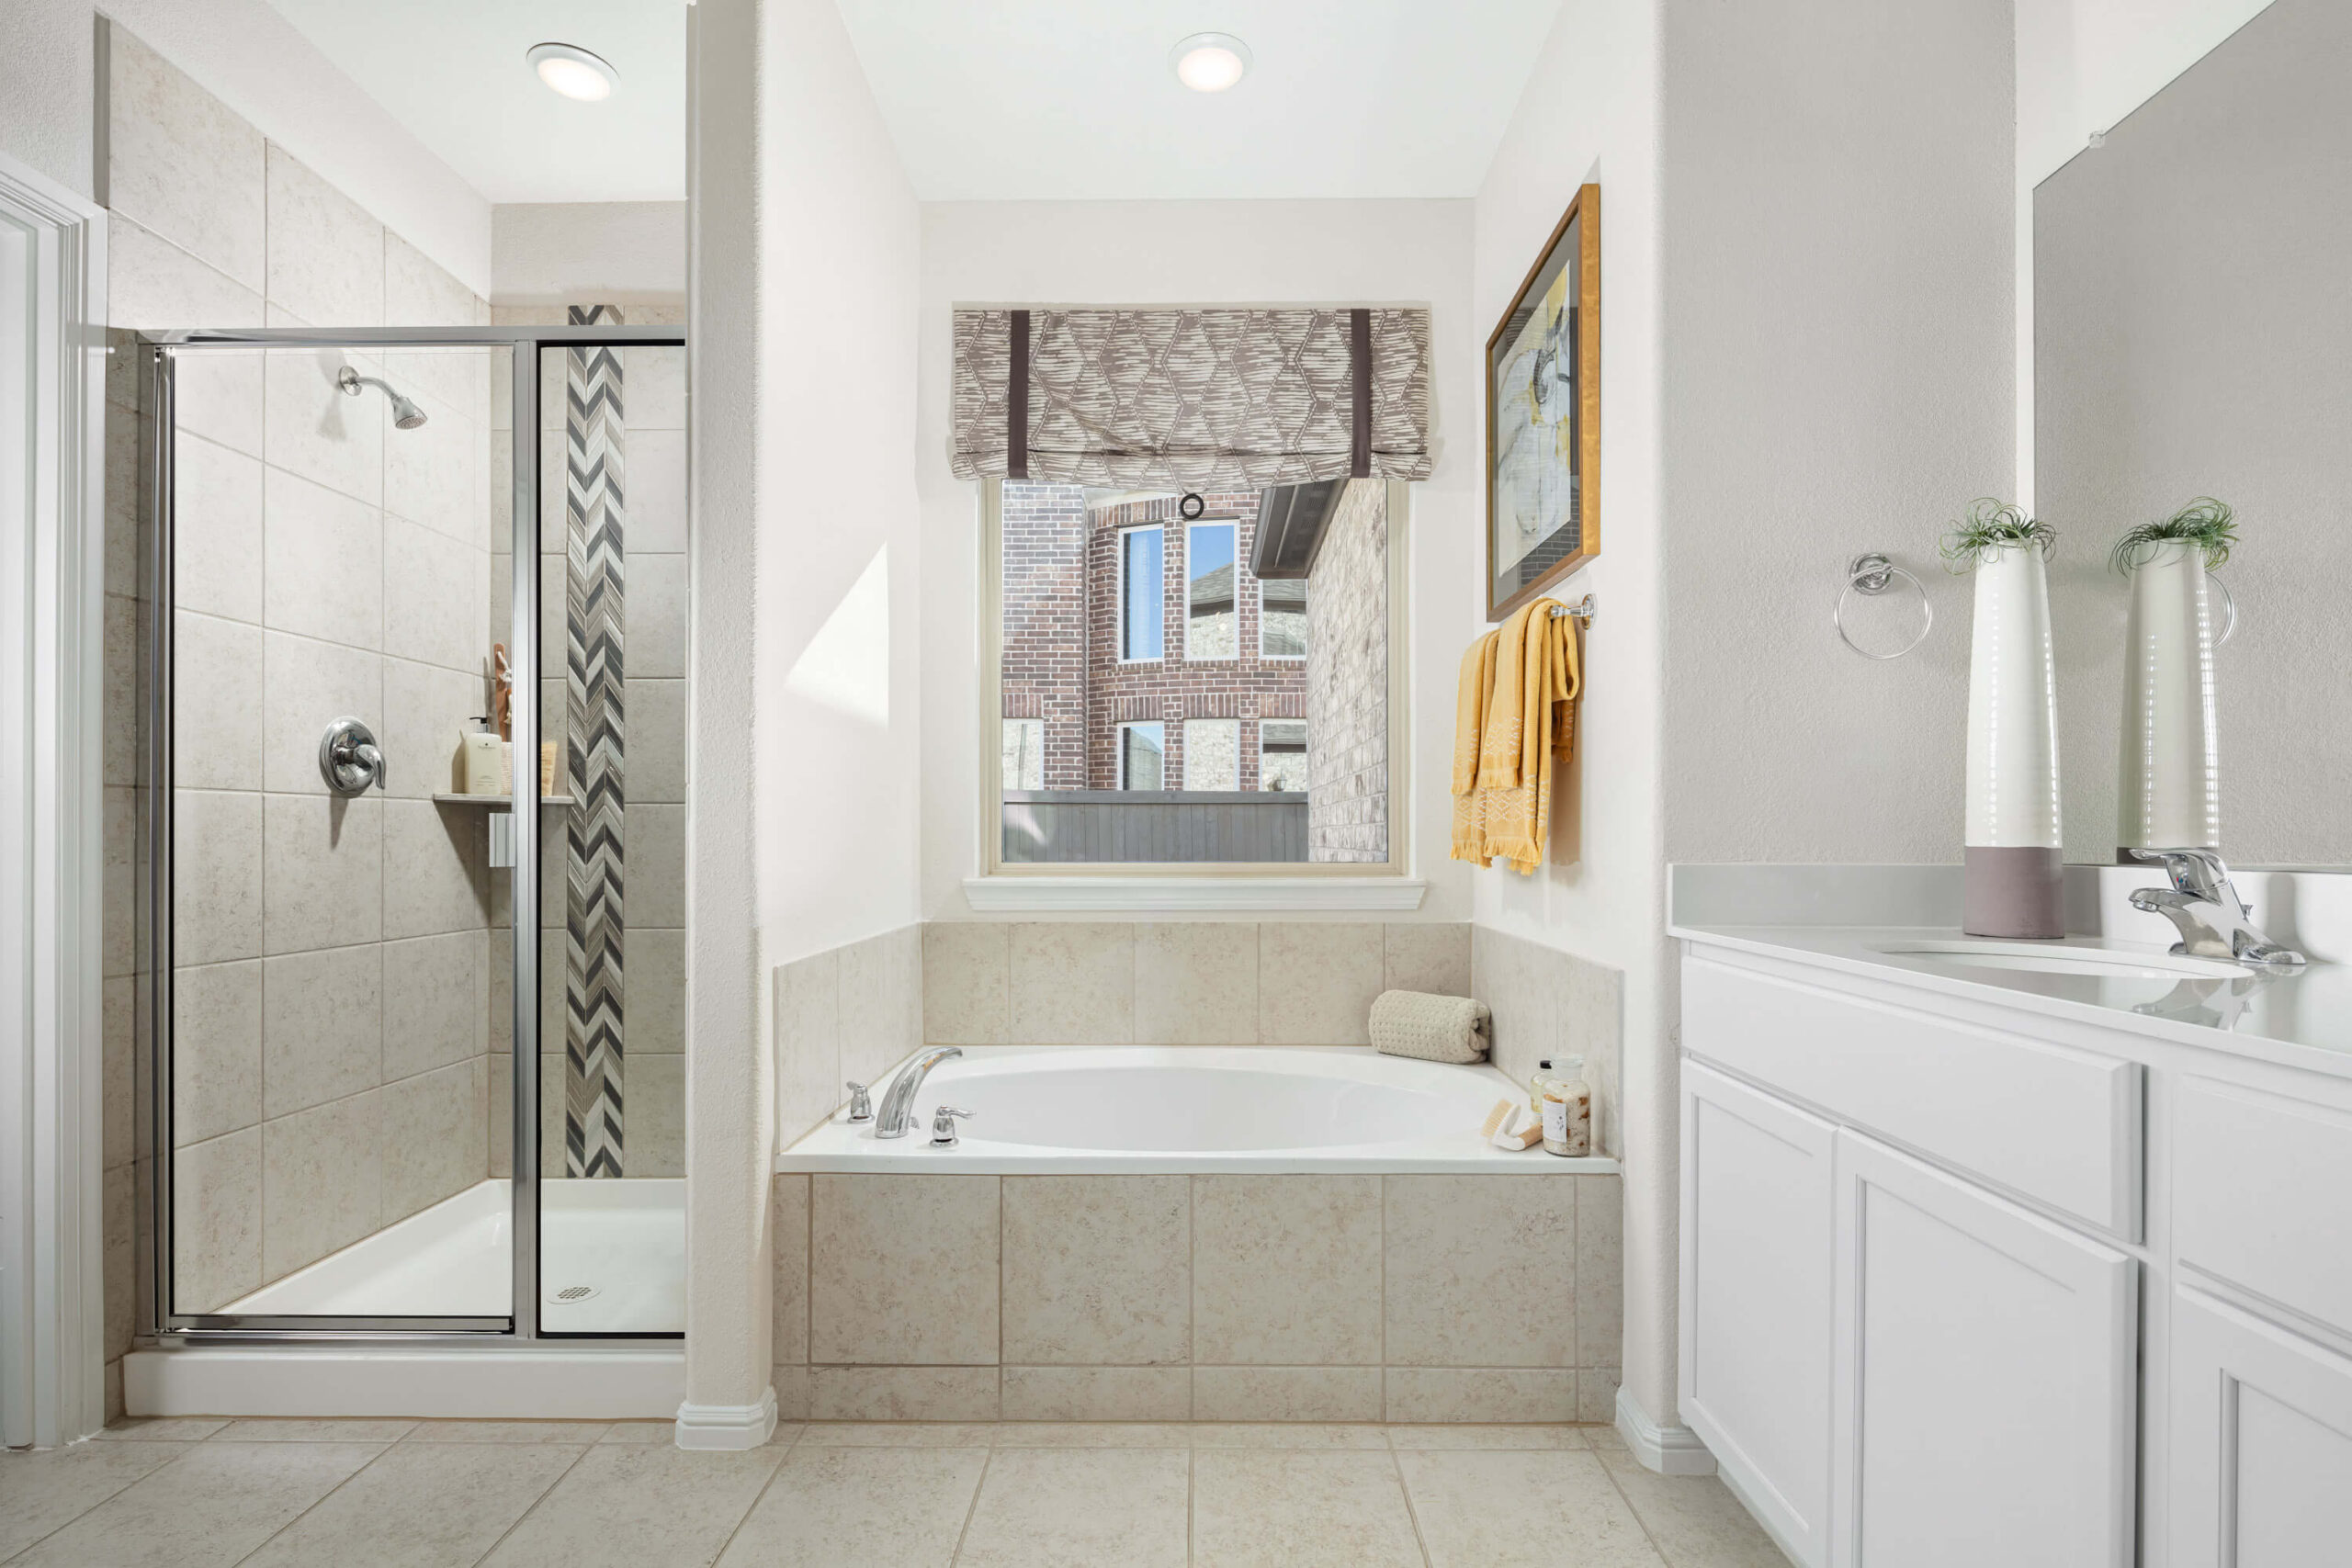 A well-lit, modern bathroom in new homes in Mansfield TX, featuring a shower stall, a bathtub, a vanity with a sink, and a window with a city view.